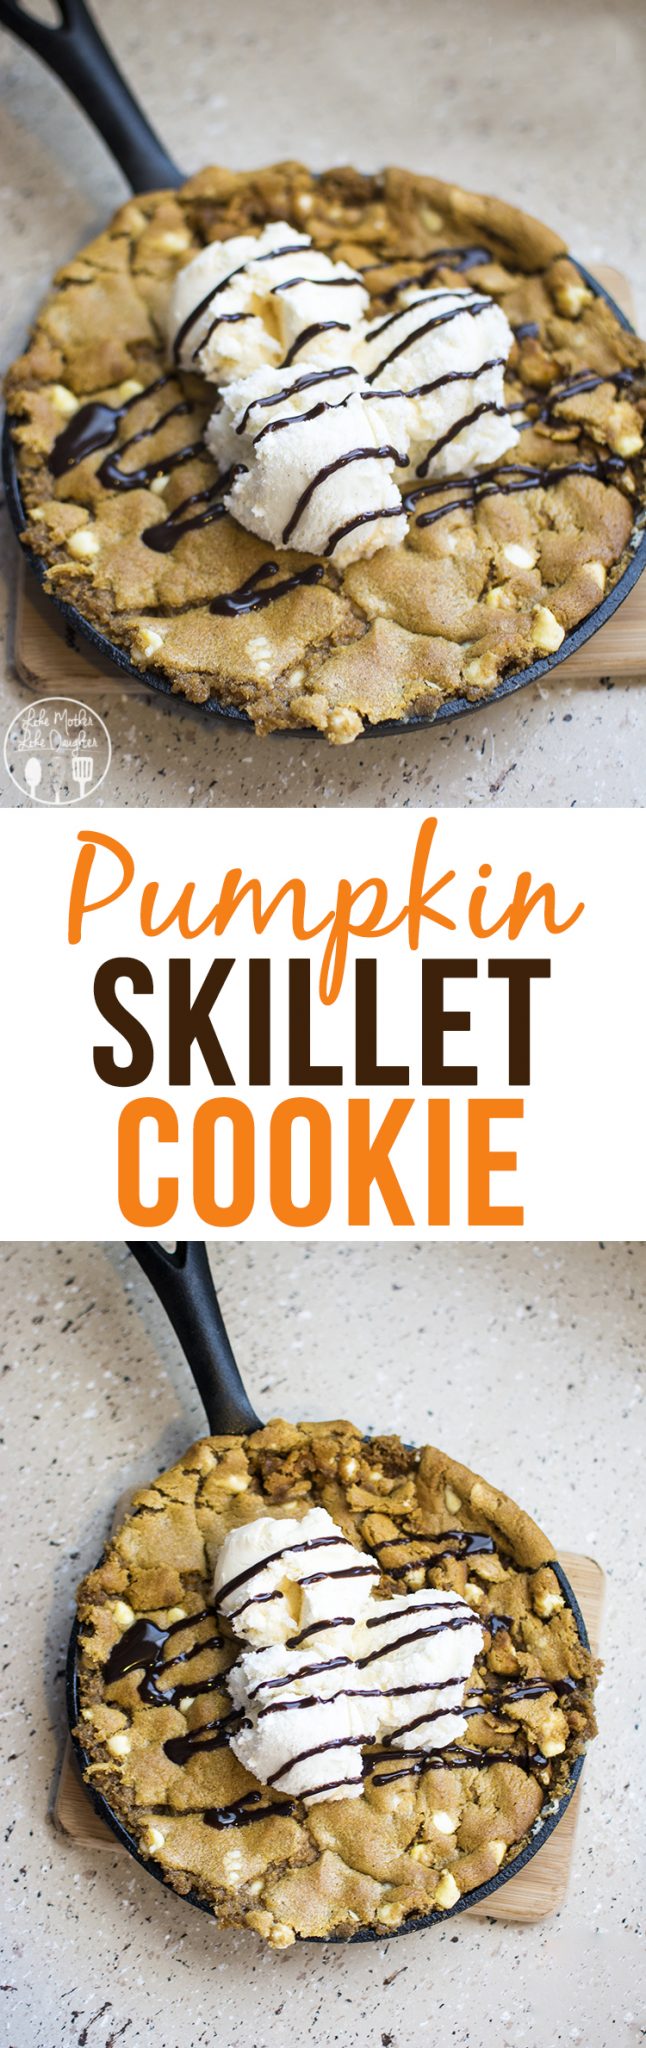 Pumpkin Spice Skillet Cookie - an easy 2 ingredient dessert that is ready in 15 minutes for the perfect fall treat!